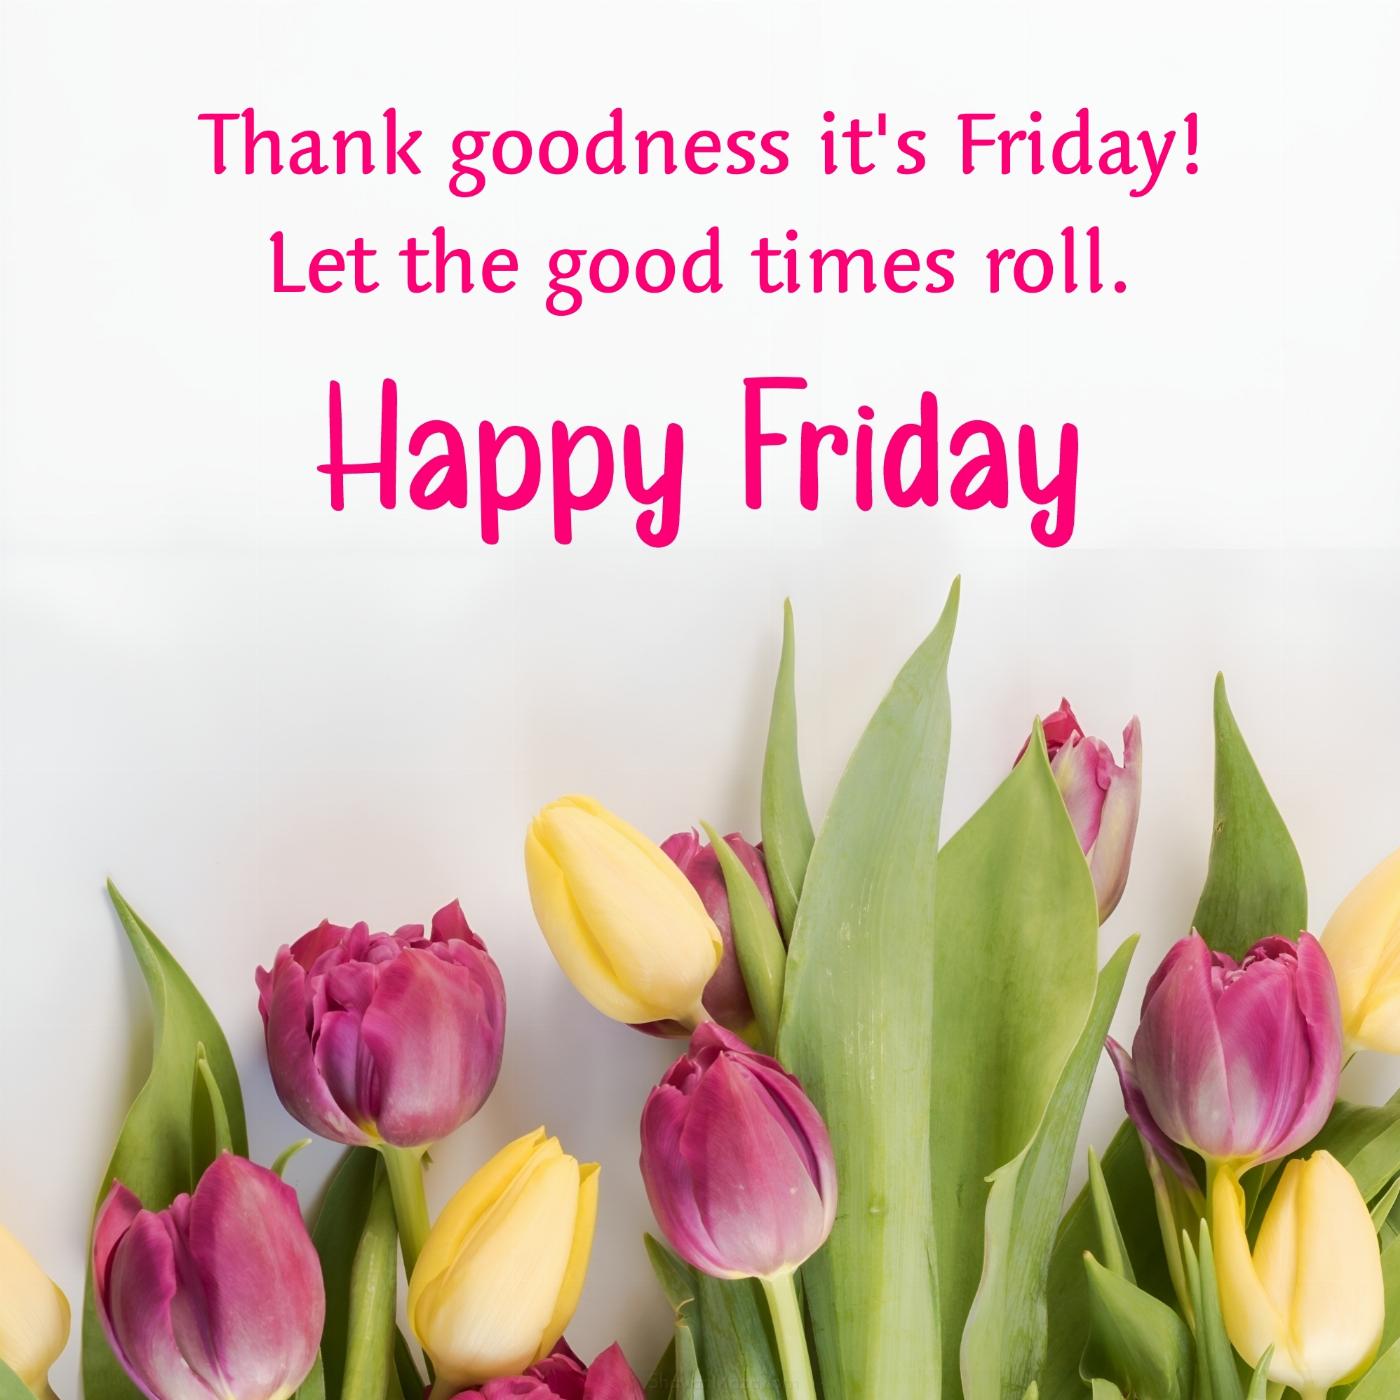 Thank goodness it's Friday! Let the good times roll